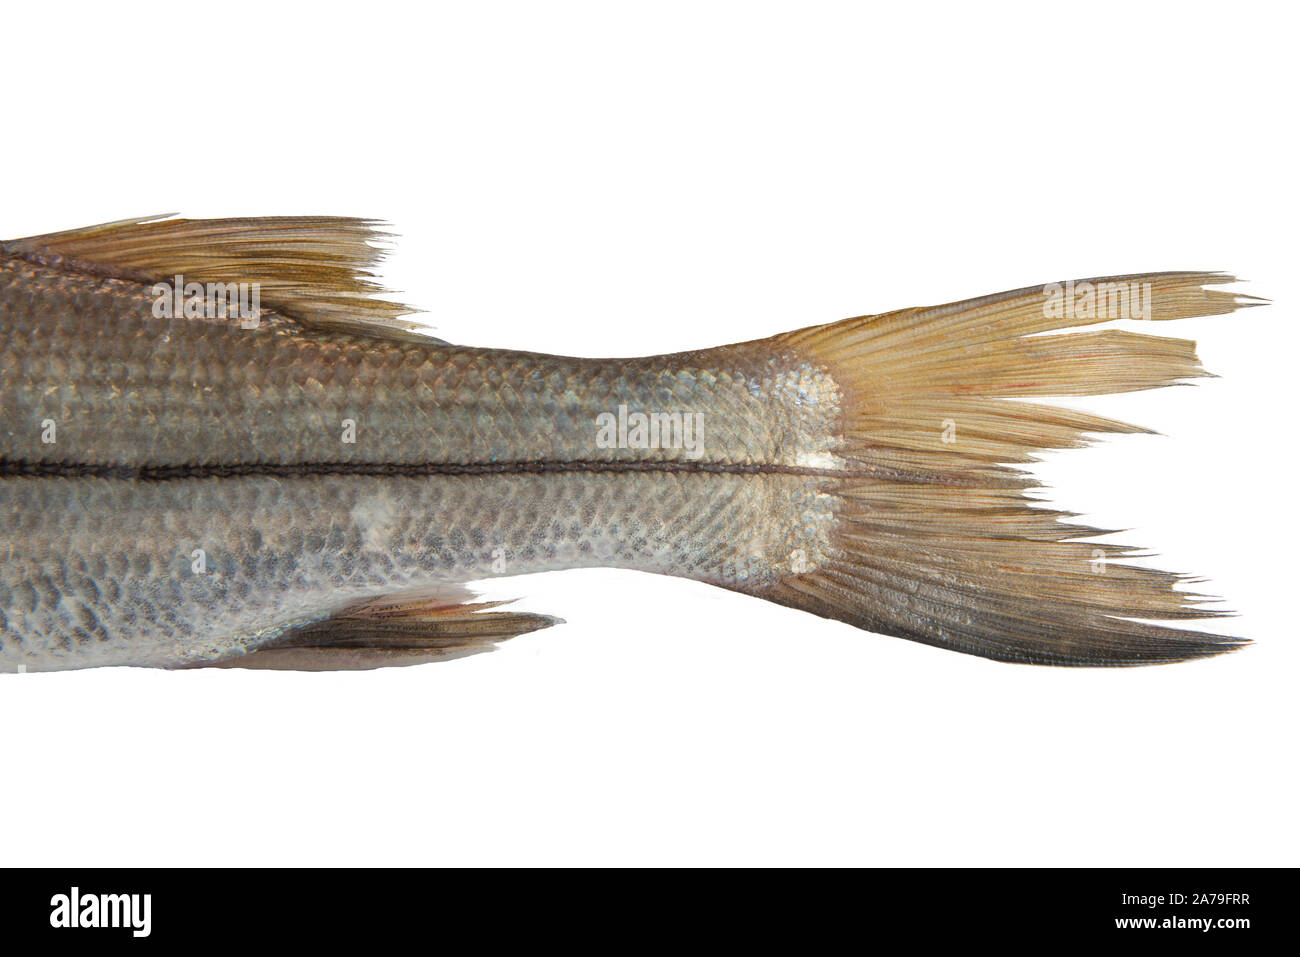 Tail of Bouche sea fish Trinidad Caribbean Isolated in white background Stock Photo